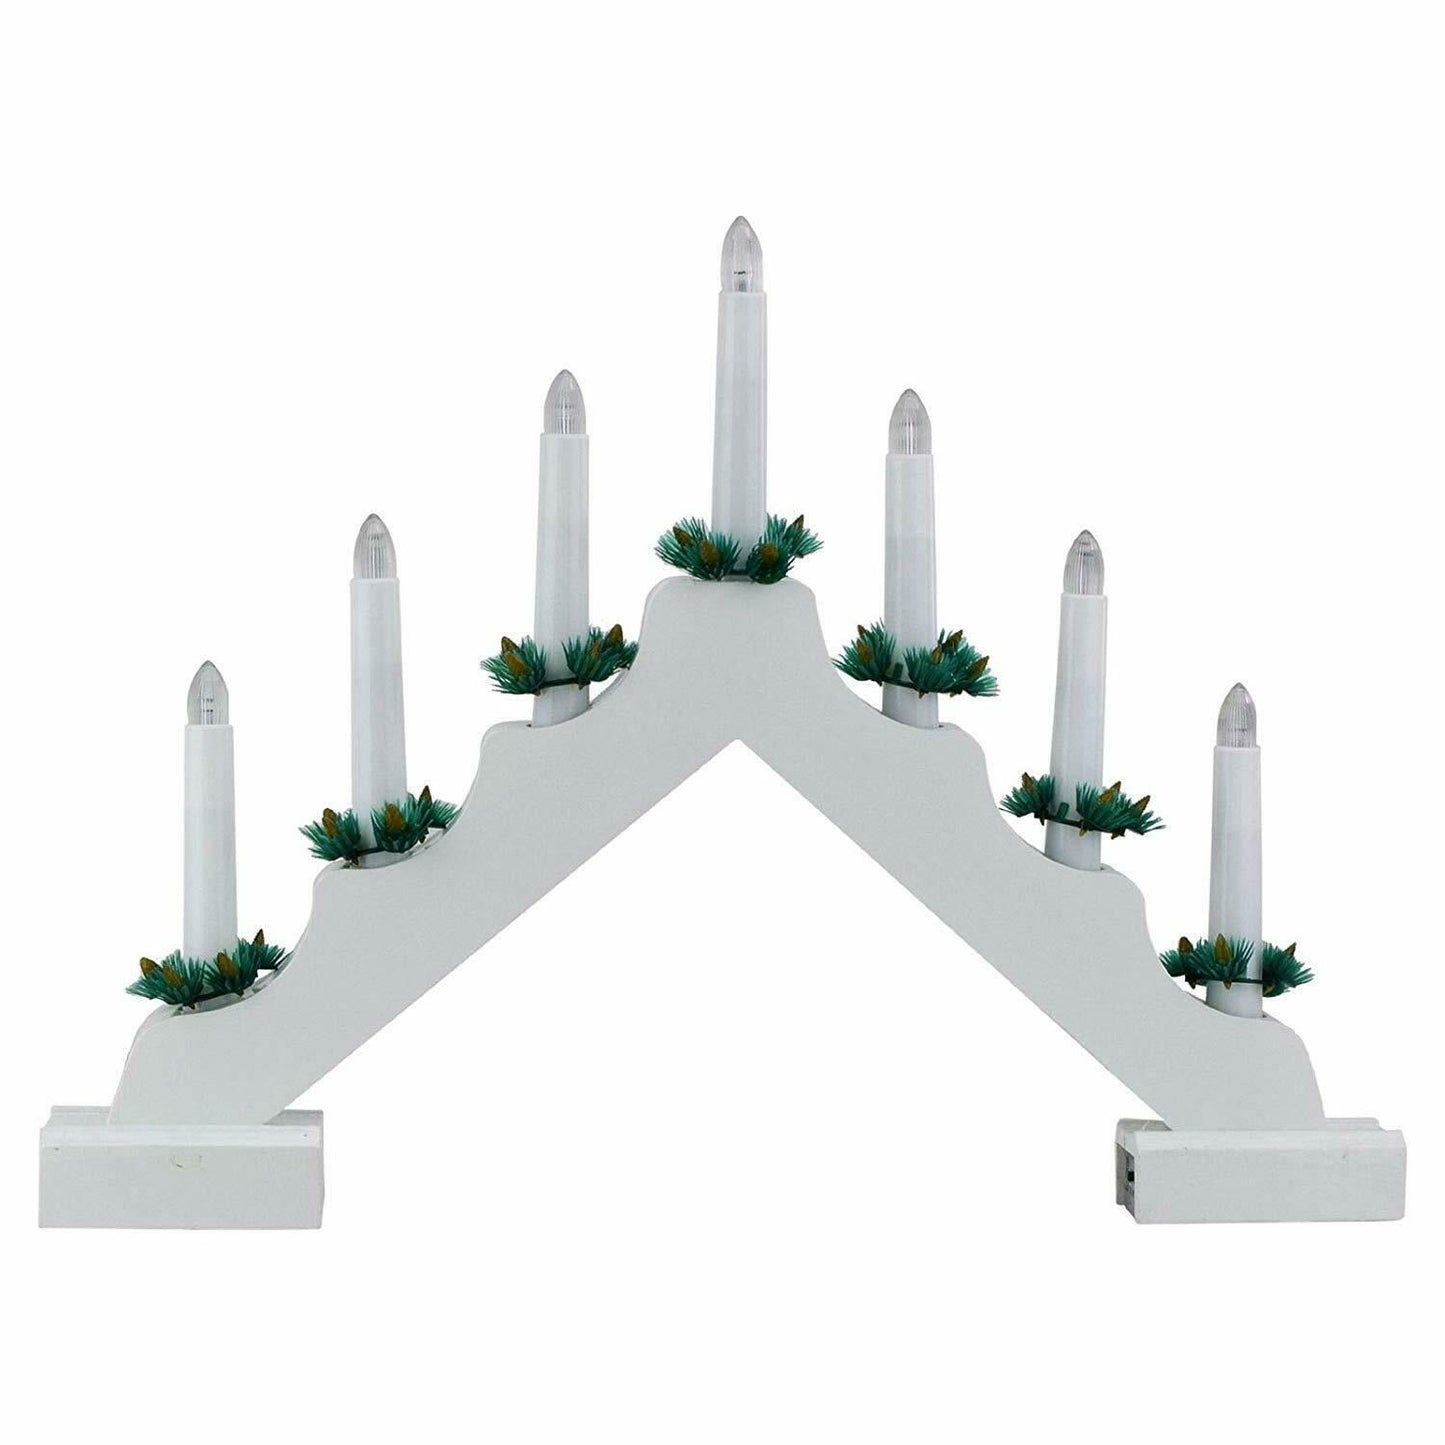 White Pre-Lit Wooden Candle Bridge With 7 Led Lights by GEEZY - UKBuyZone